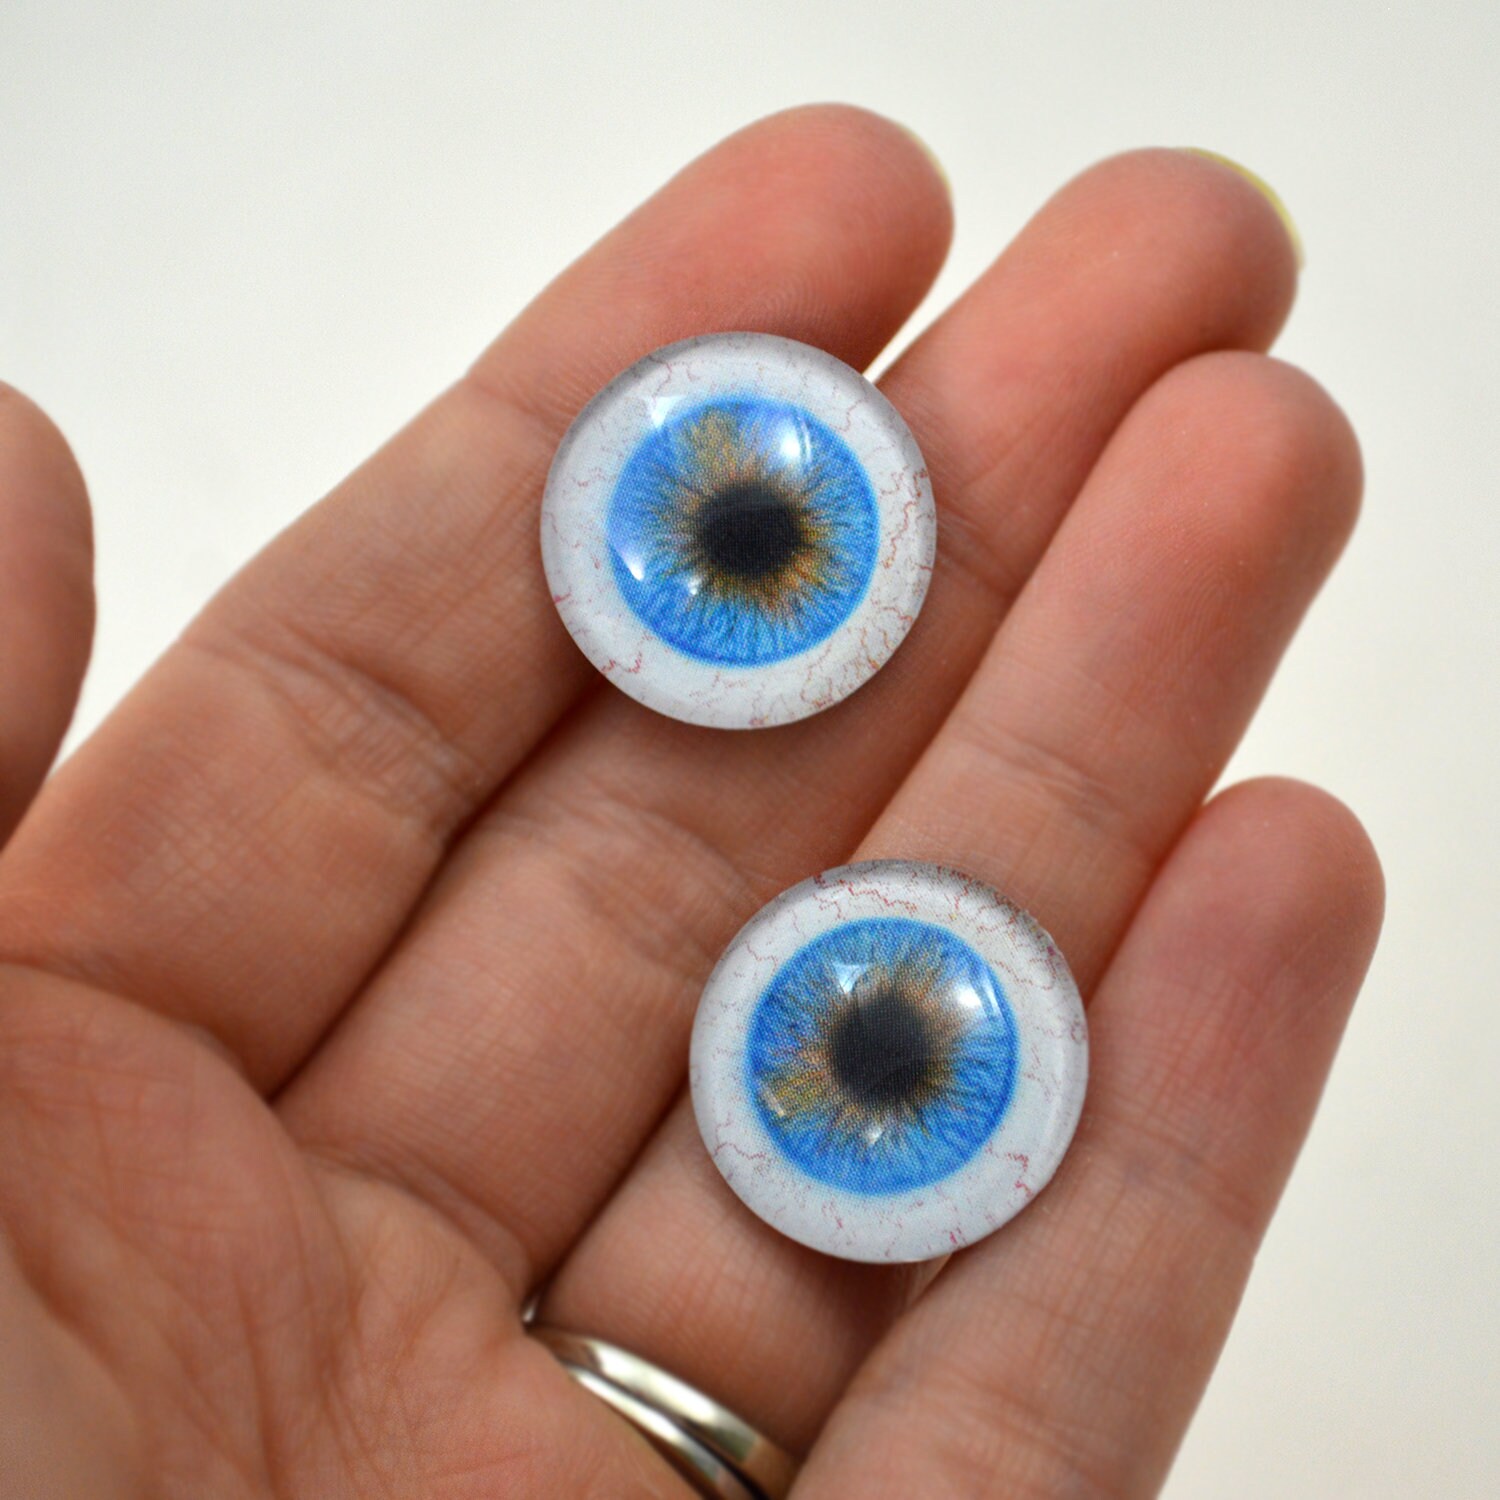 50mm Huge Blue Human Glass Eyes Pair with Sclera Whites - for Art Dolls,  Sculptures, Props, Halloween, Jewelry Making, Taxidermy, and More